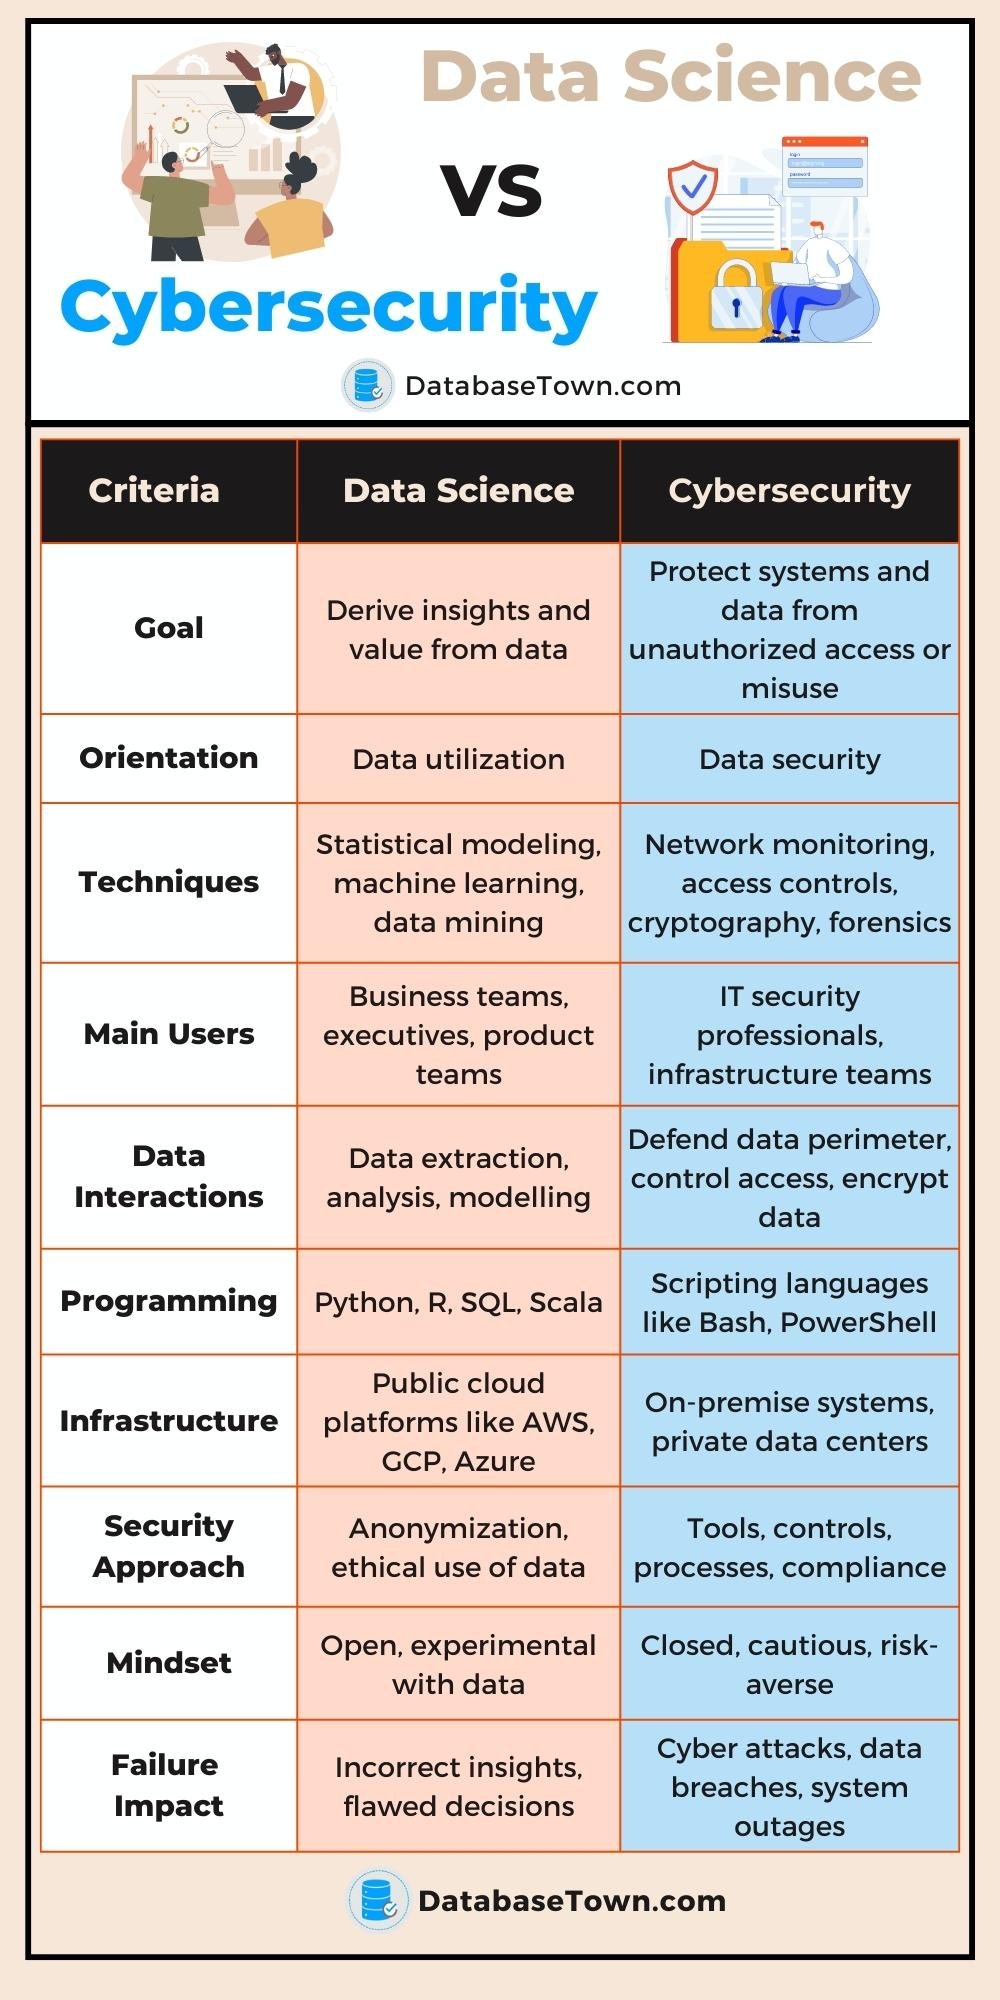 Data Science VS Cybersecurity (Key Differences)